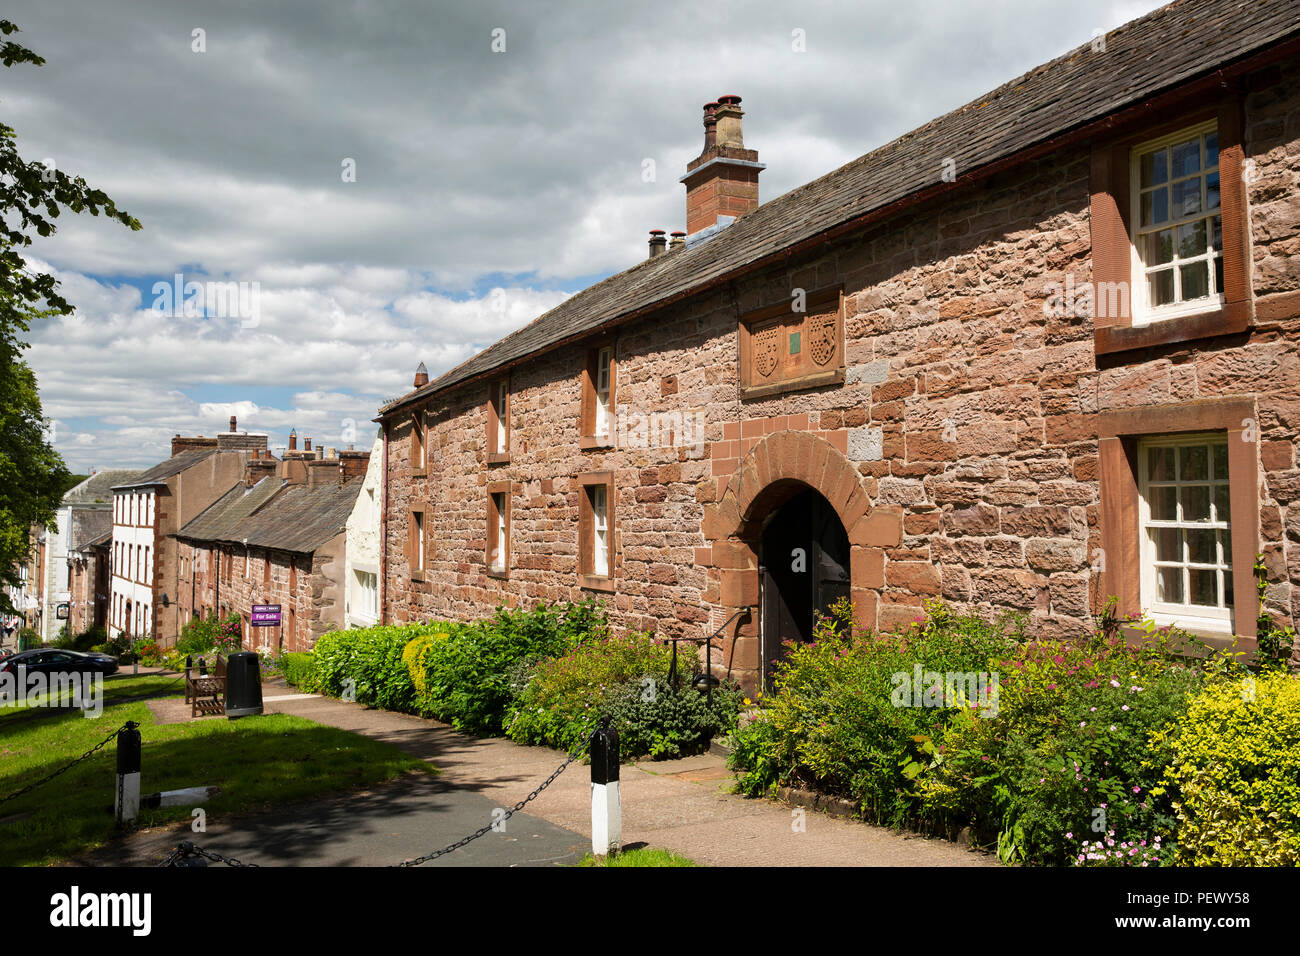 UK, Cumbria, Eden Valley, Appleby, St Anne’s Hospital, 1651 Almshouses founded by Lady Anne Clifford, exterior Stock Photo